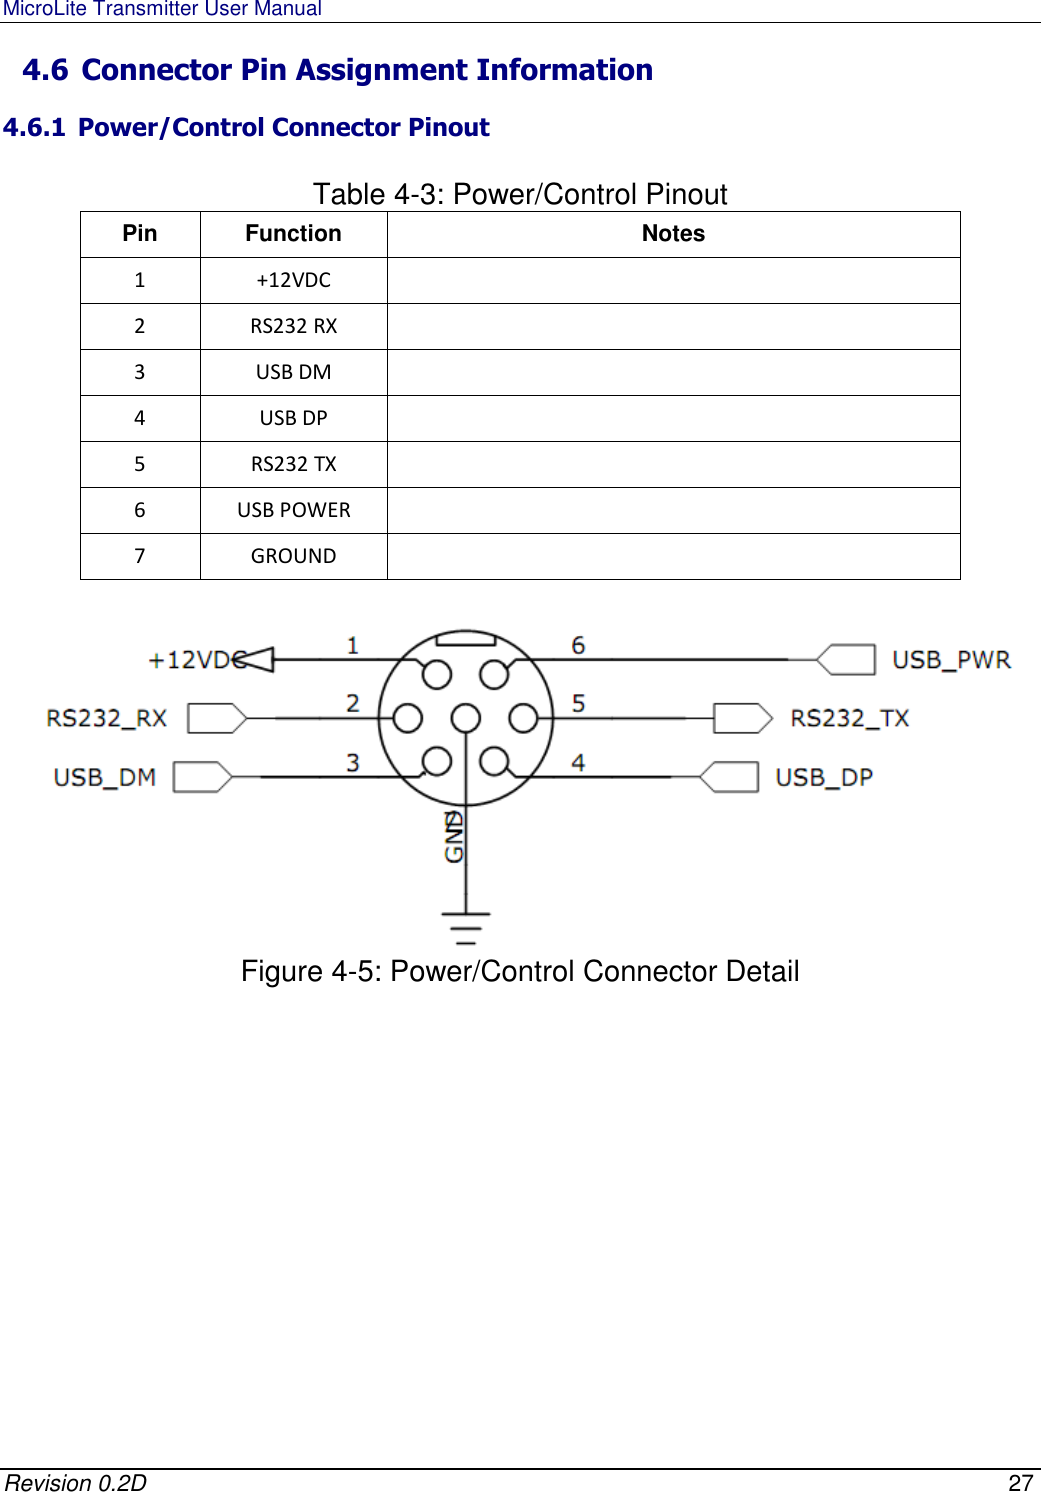 MicroLite Transmitter User Manual   Revision 0.2D    27 4.6 Connector Pin Assignment Information 4.6.1 Power/Control Connector Pinout  Table 4-3: Power/Control Pinout Pin  Function  Notes 1  +12VDC   2  RS232 RX   3  USB DM   4  USB DP   5  RS232 TX   6  USB POWER   7  GROUND     Figure 4-5: Power/Control Connector Detail    